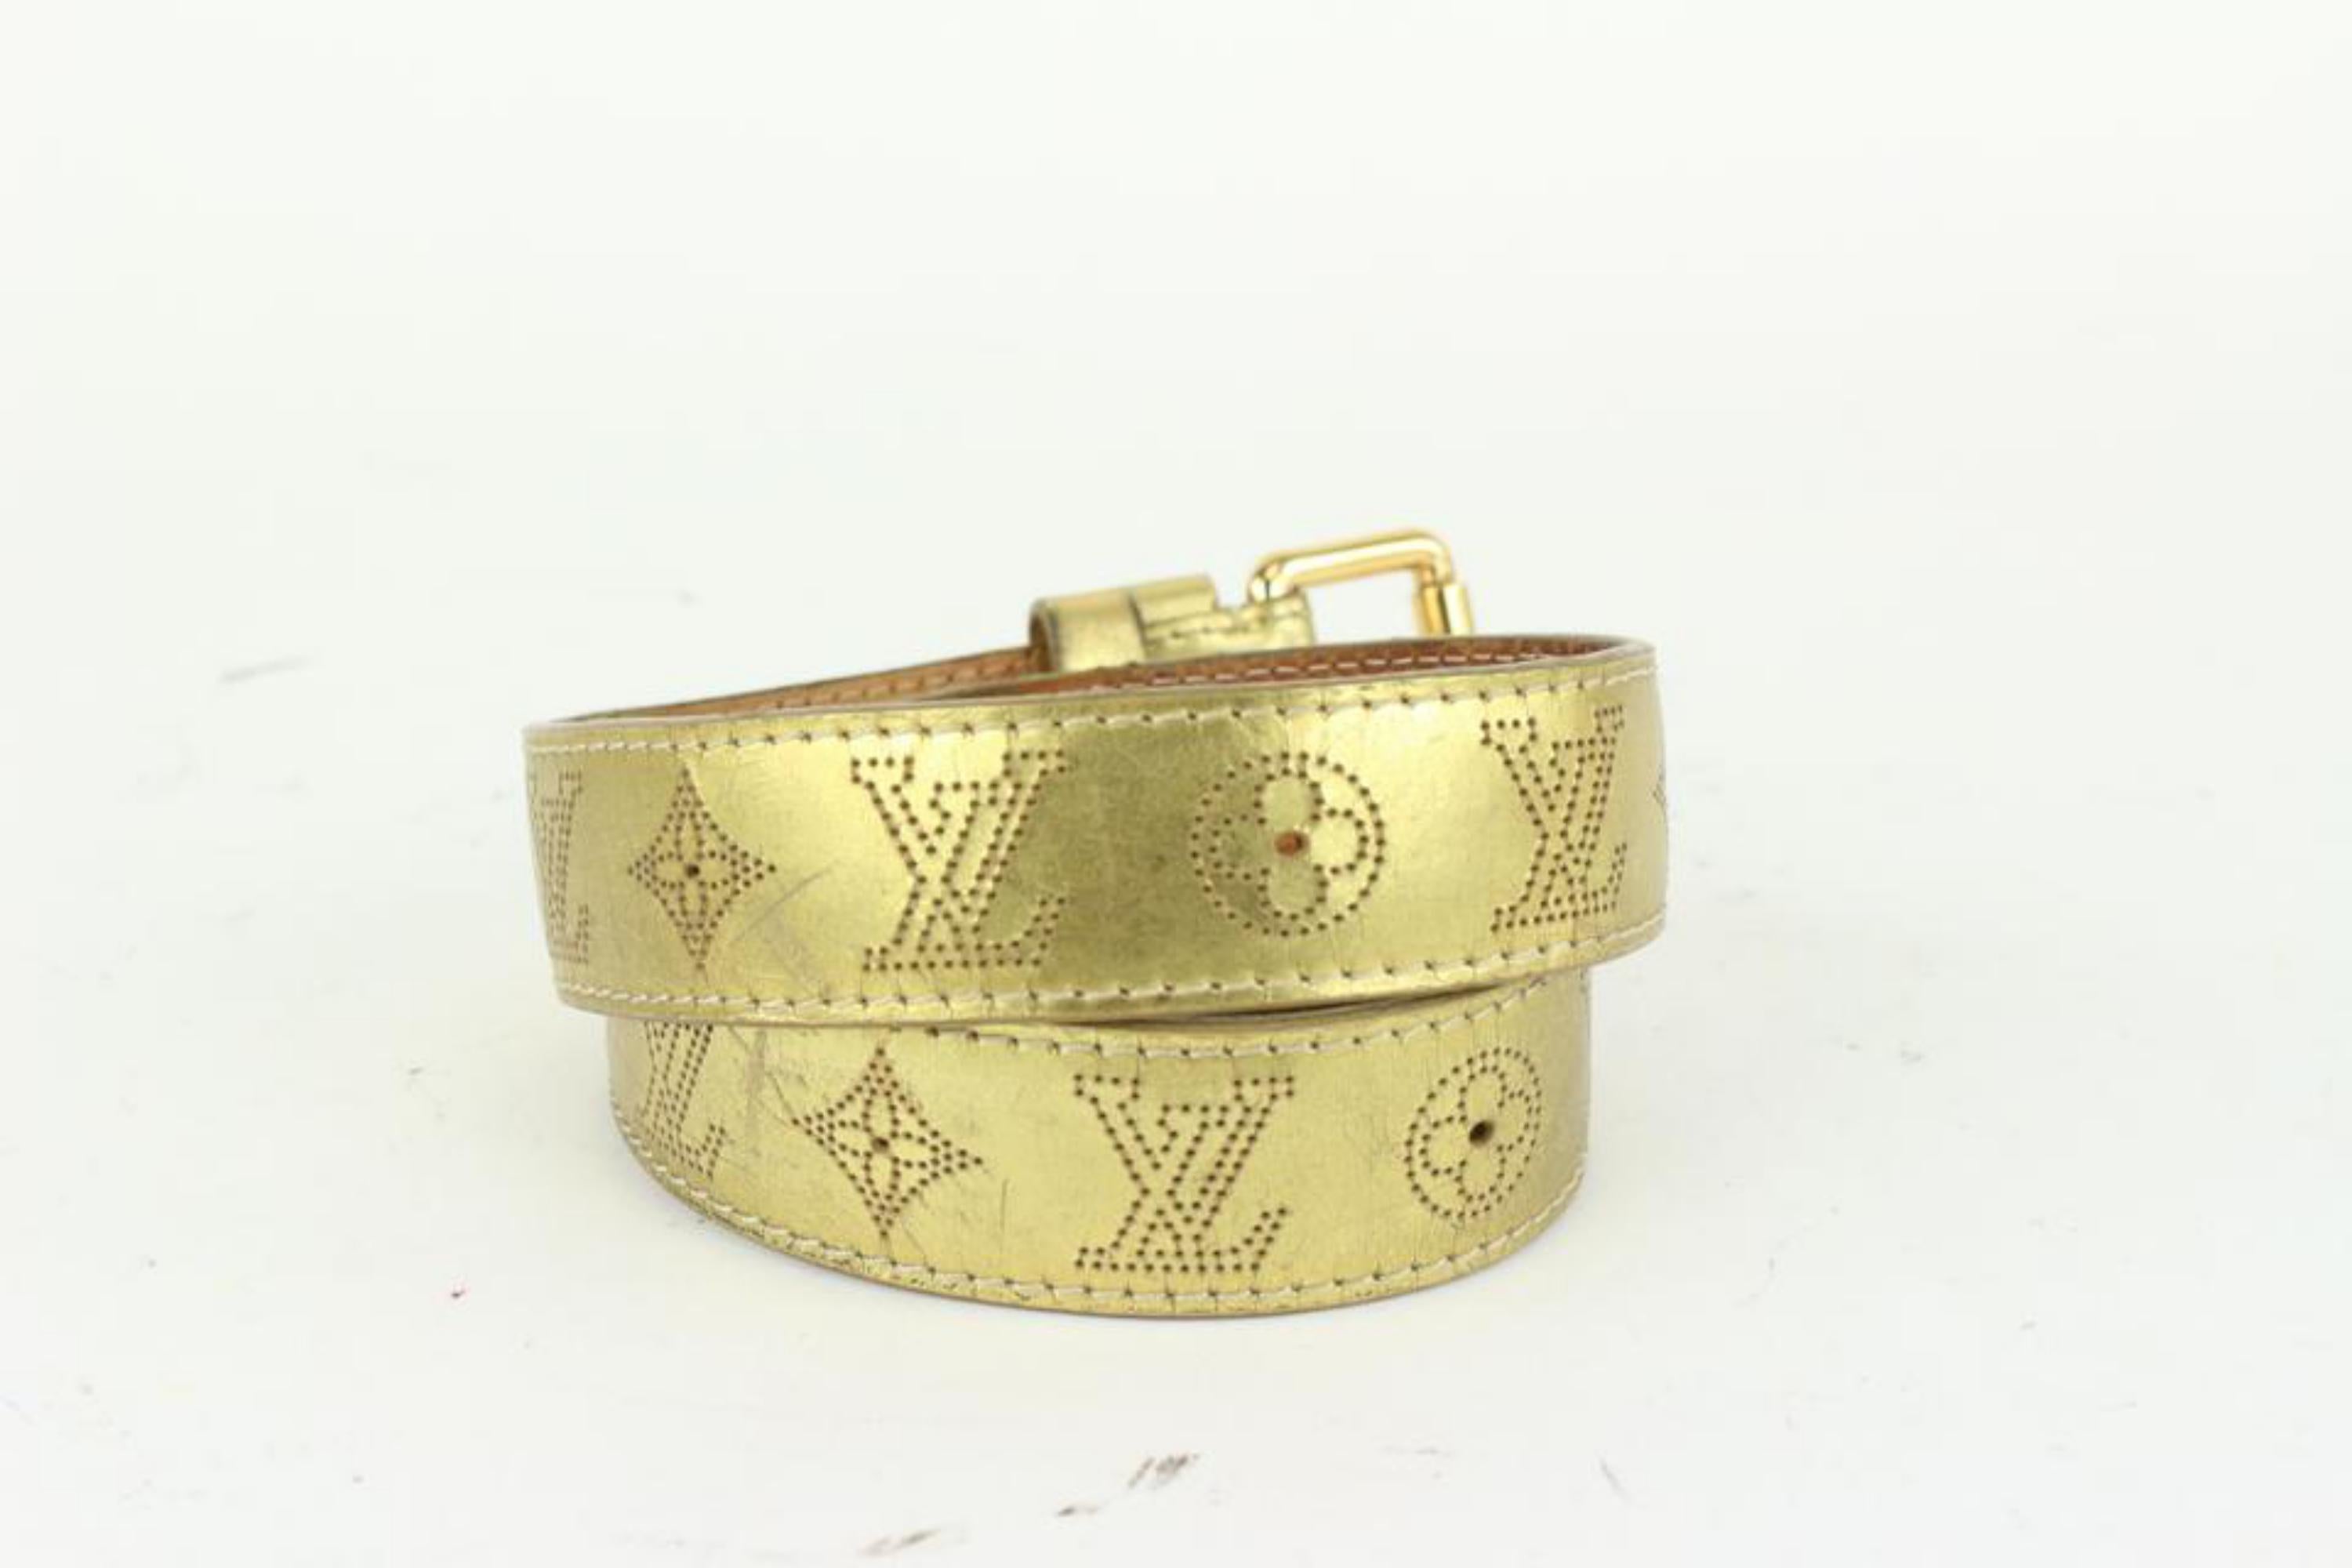 Louis Vuitton 85/34 Gold Perforated Leather Mahina Belt 927LV1 2